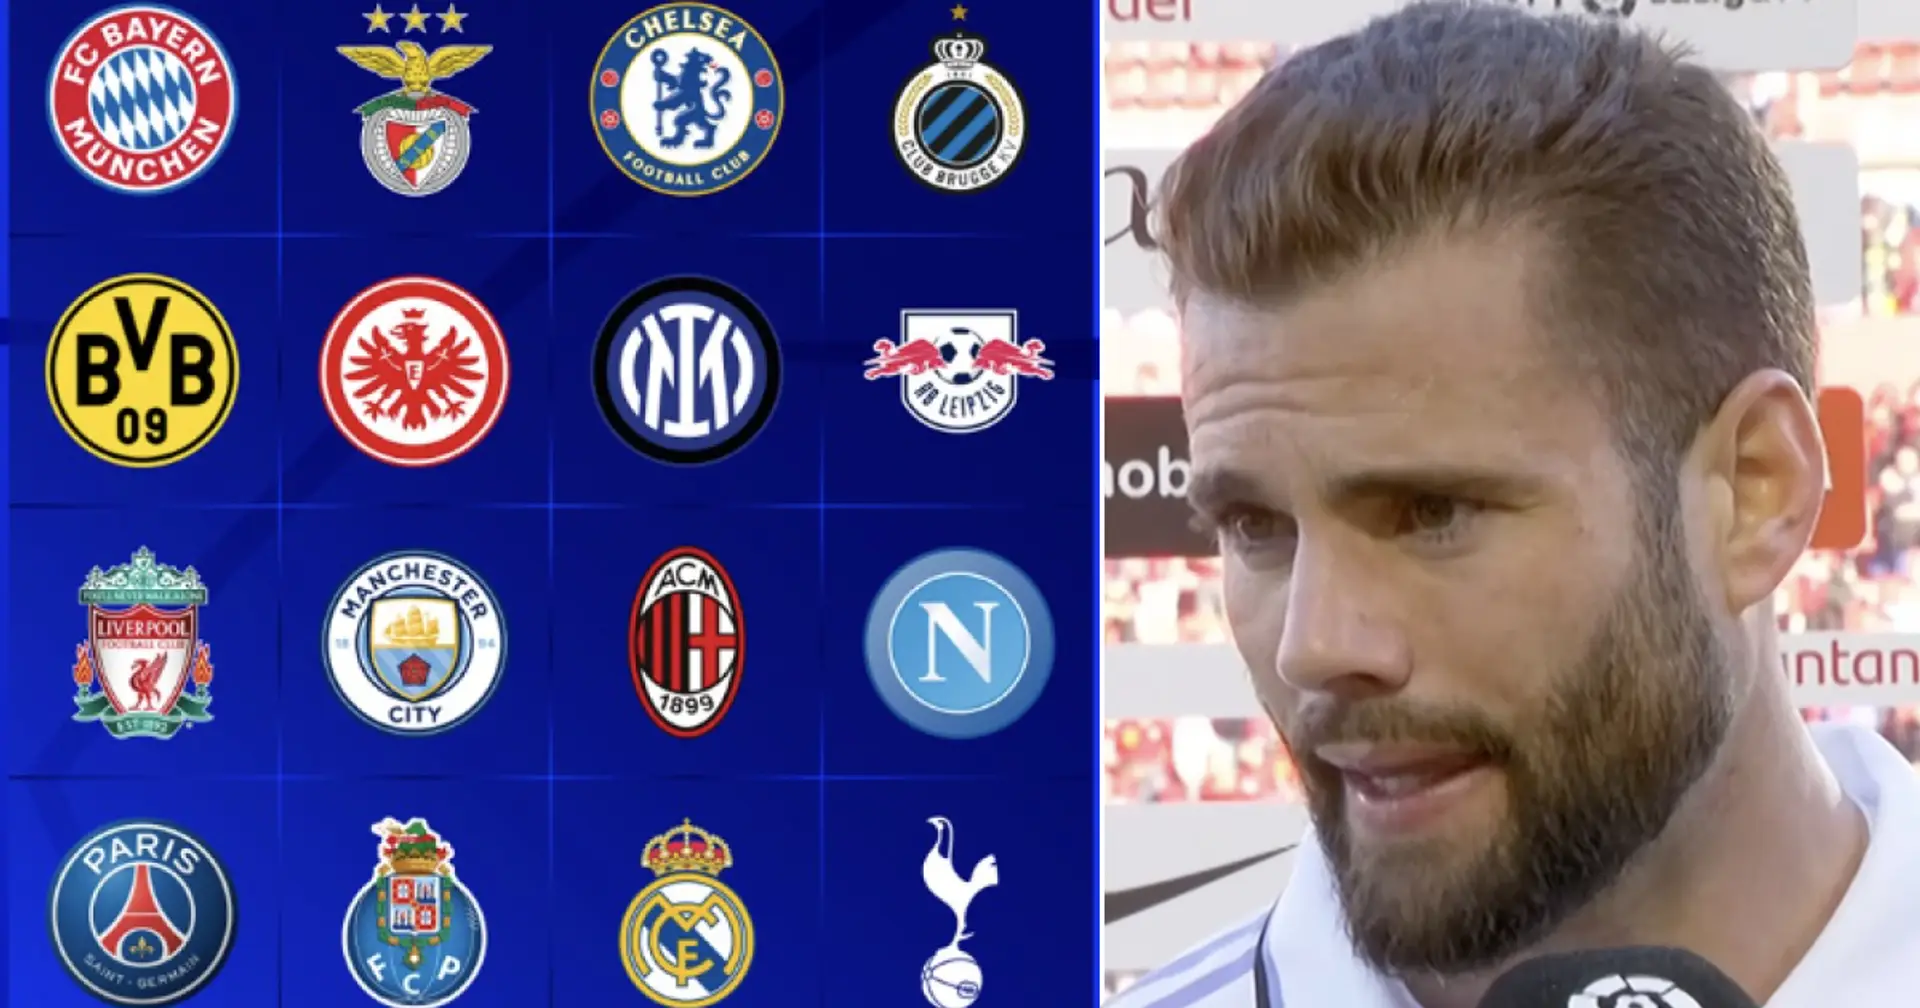 Nacho reportedly set to turn down Madrid's contract renewal, likely next destination named -- not MLS